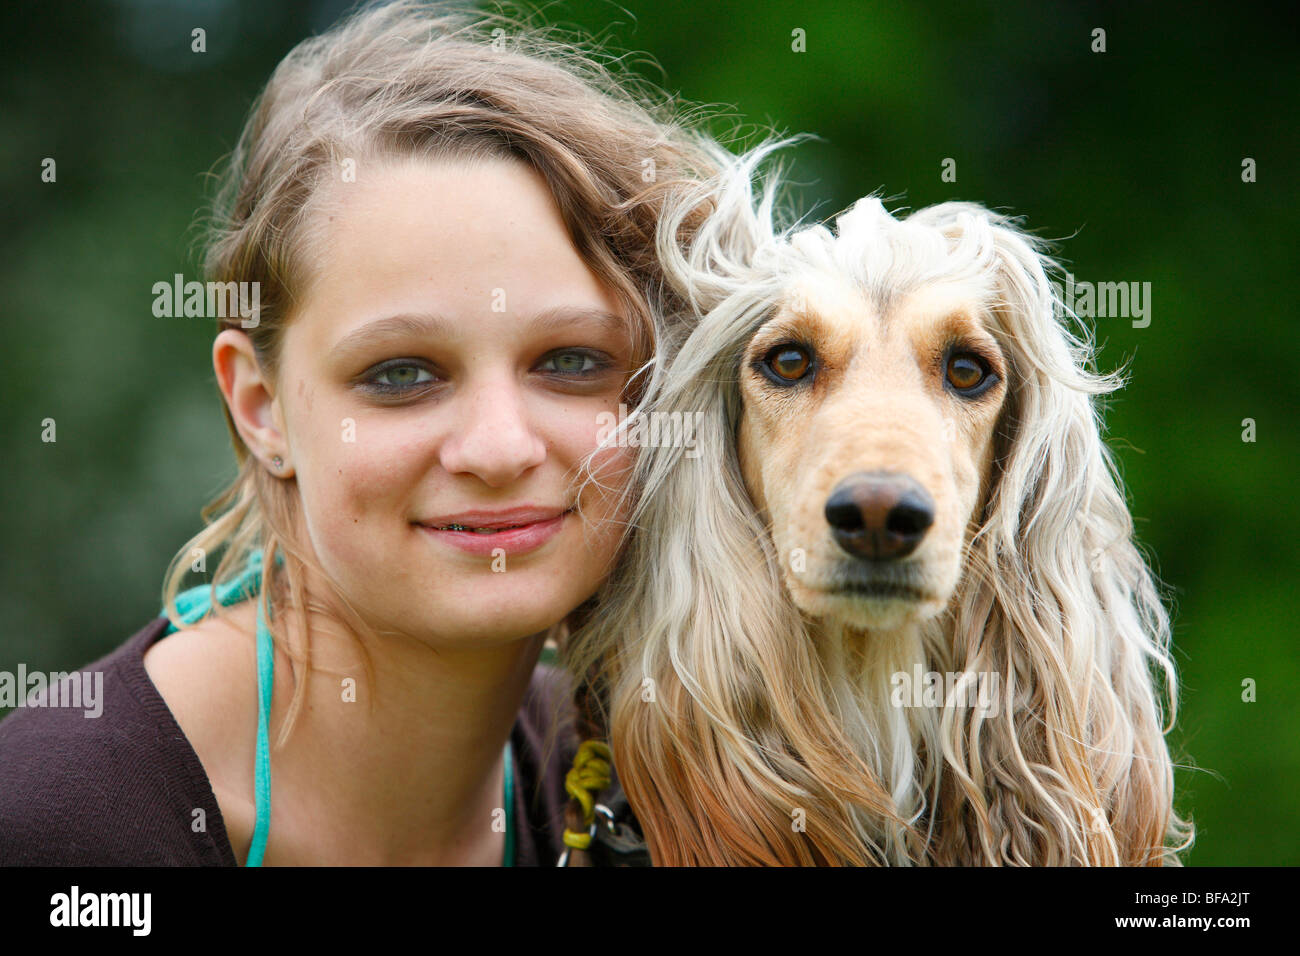 Afghanistan Hound, Afghan Hound (Canis lupus f. familiaris), girl embracing a dog Stock Photo